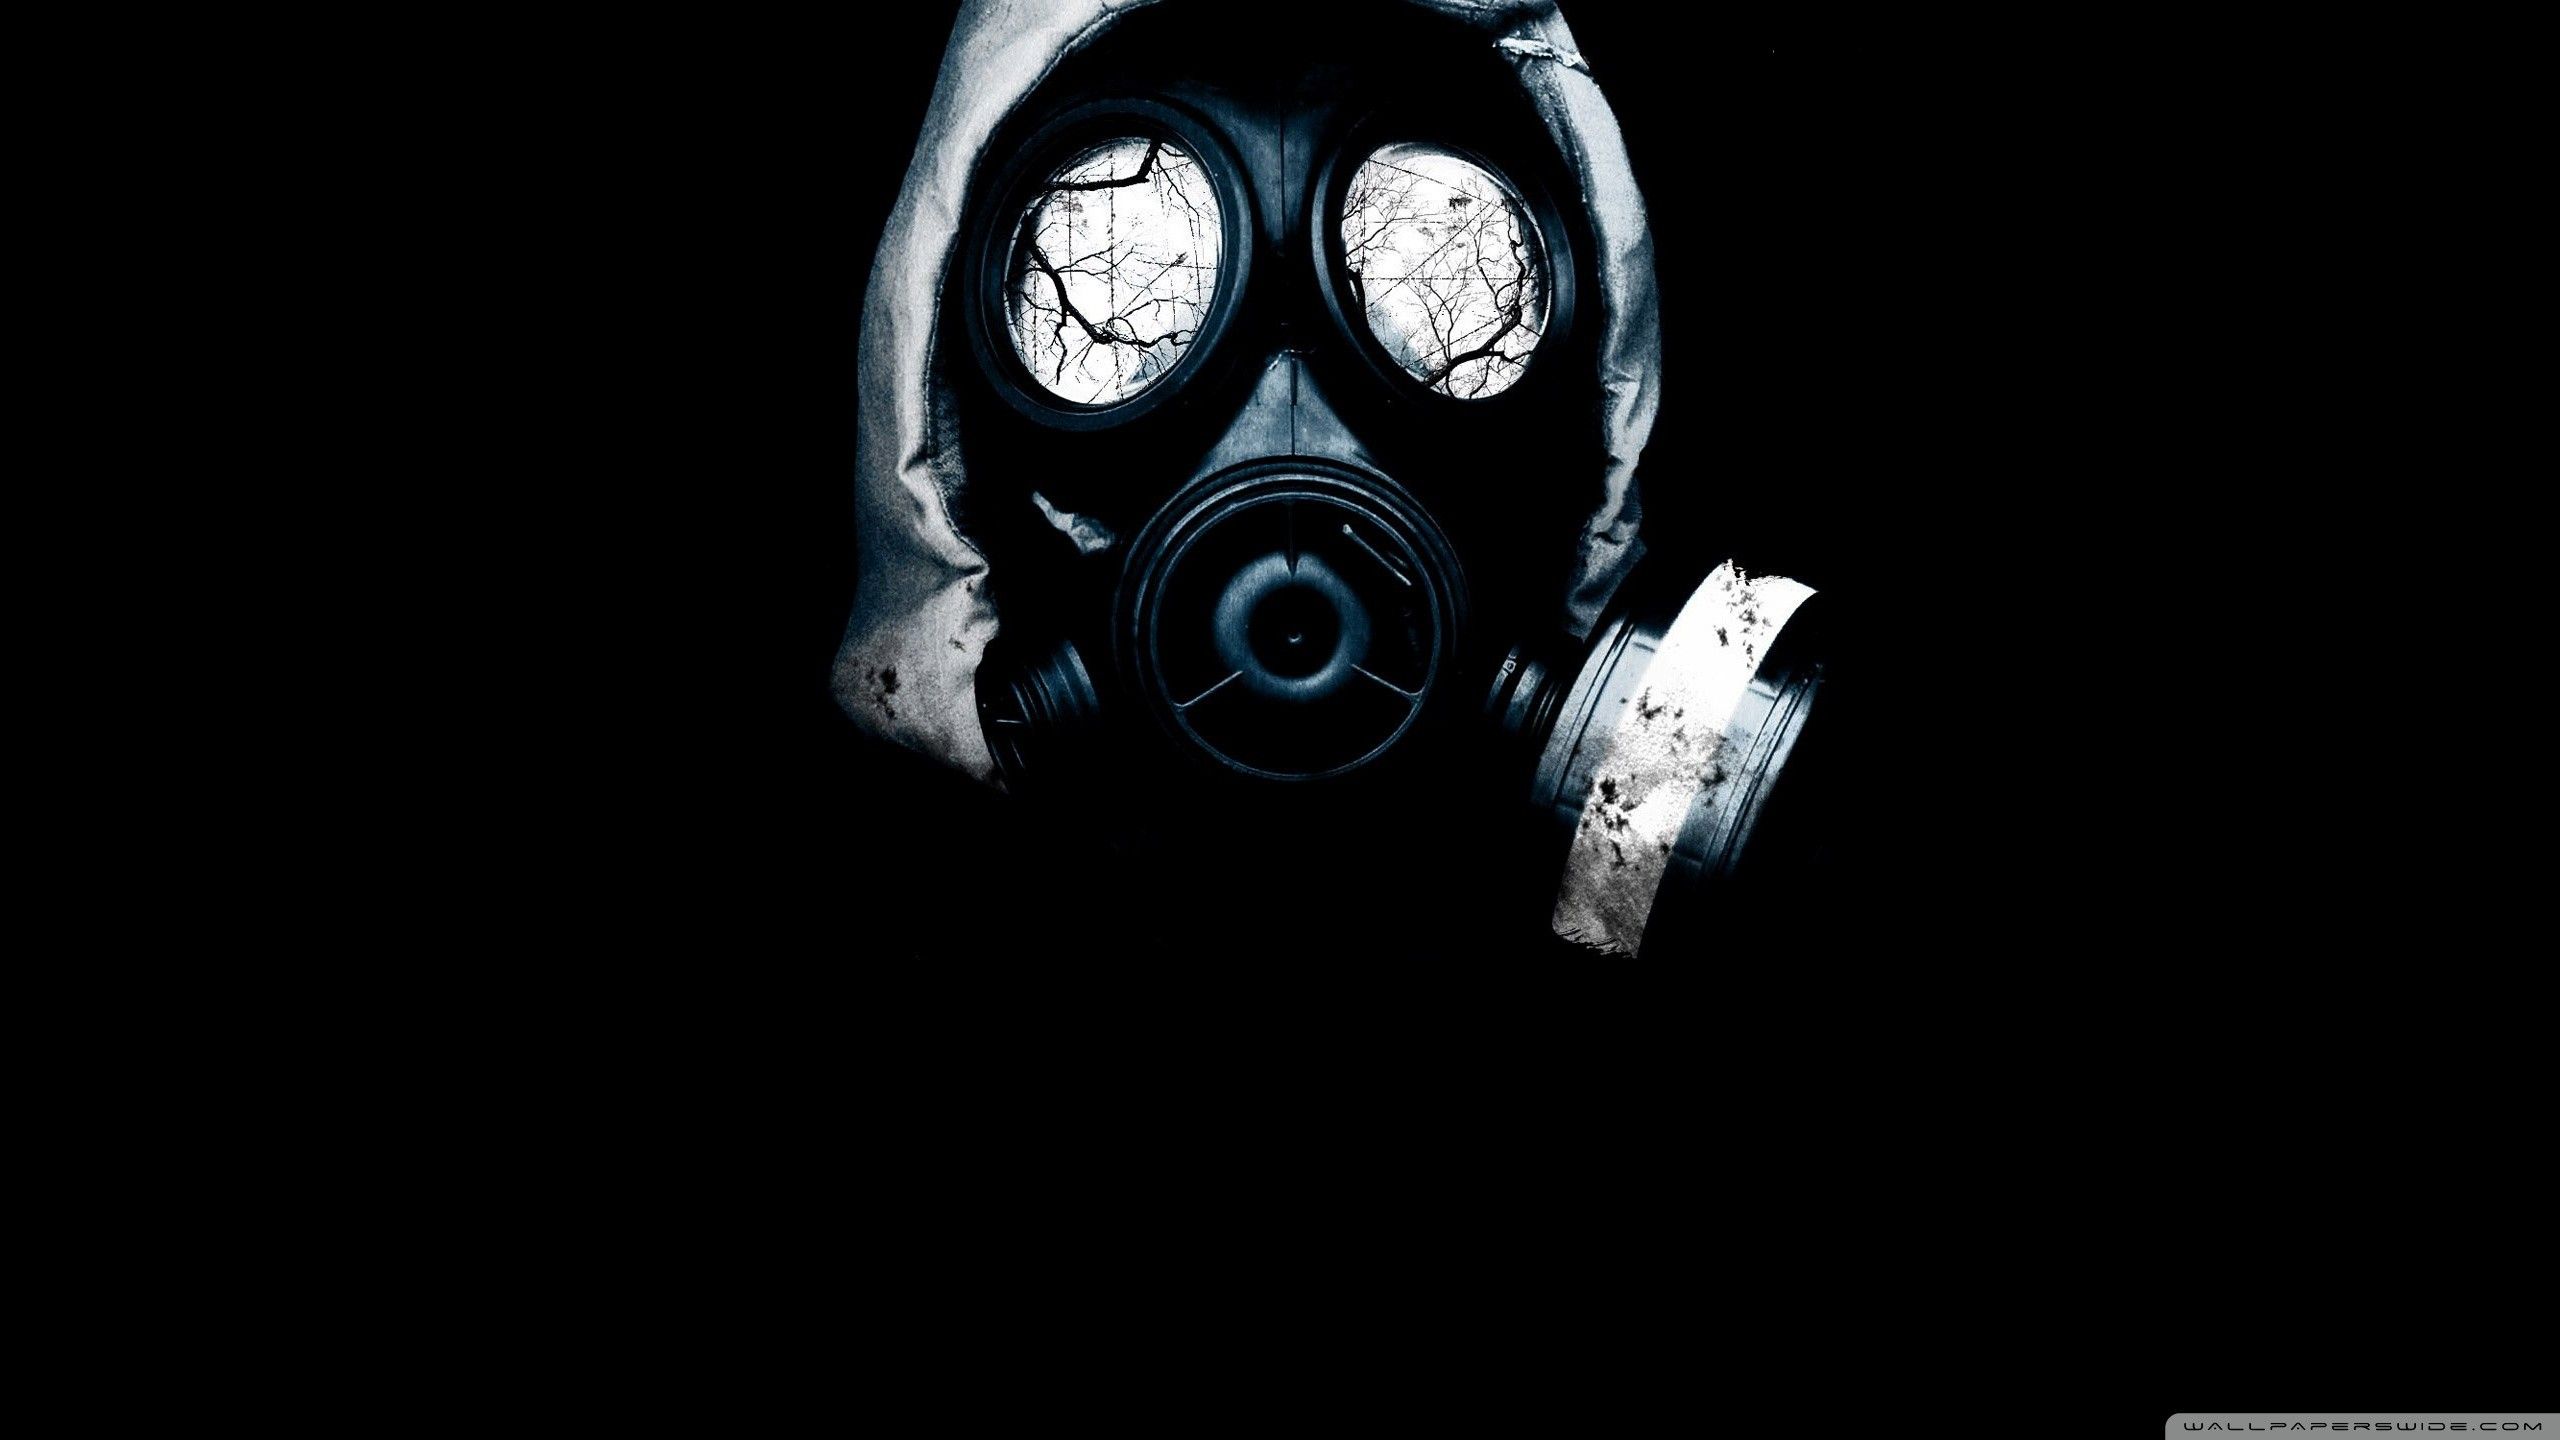 Gas Mask Wallpapers 4k Hd Gas Mask Backgrounds On Wallpaperbat 8830